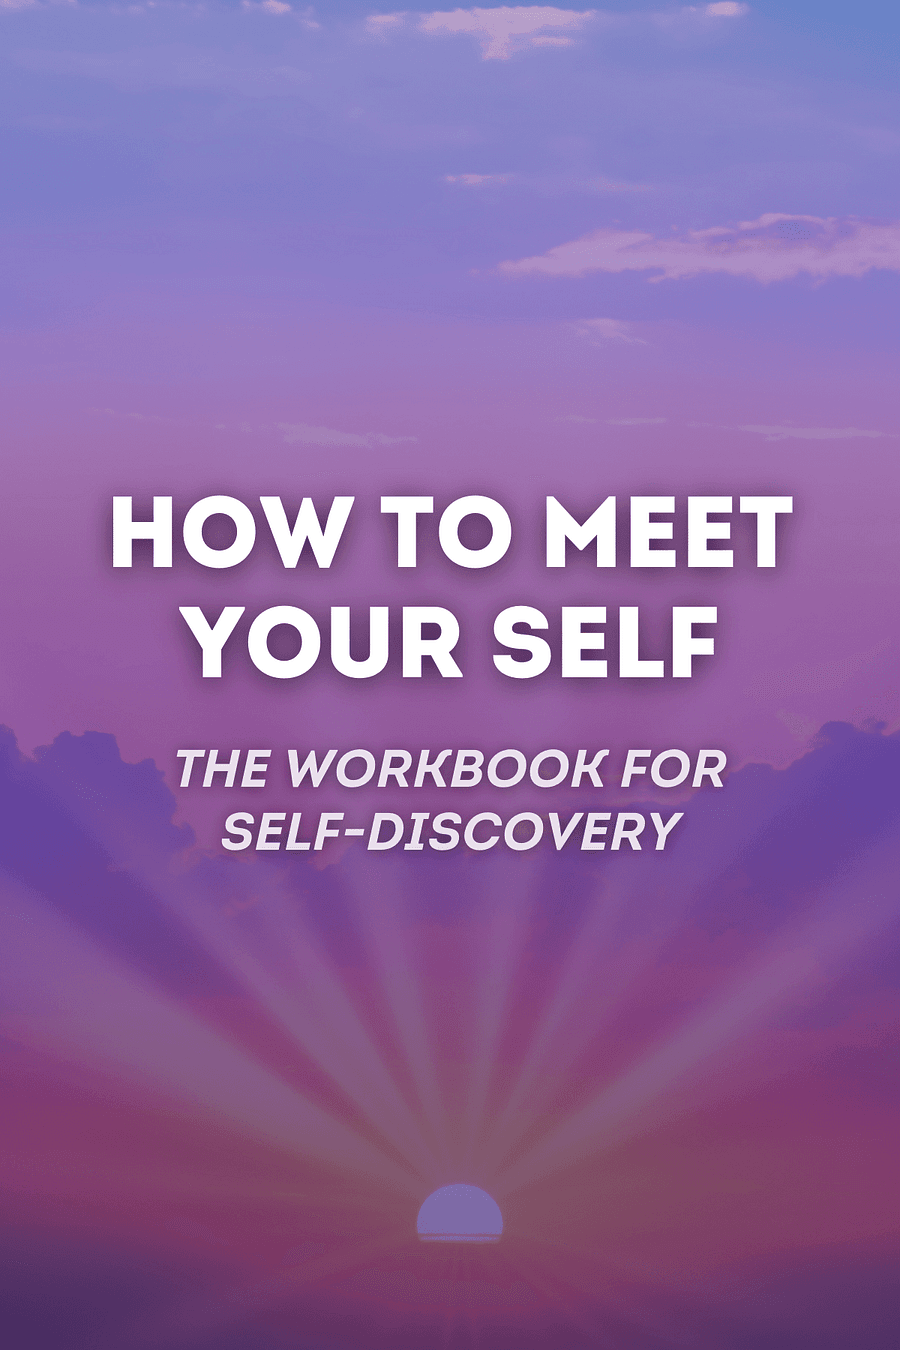 How to Meet Your Self by Nicole LePera - Book Summary